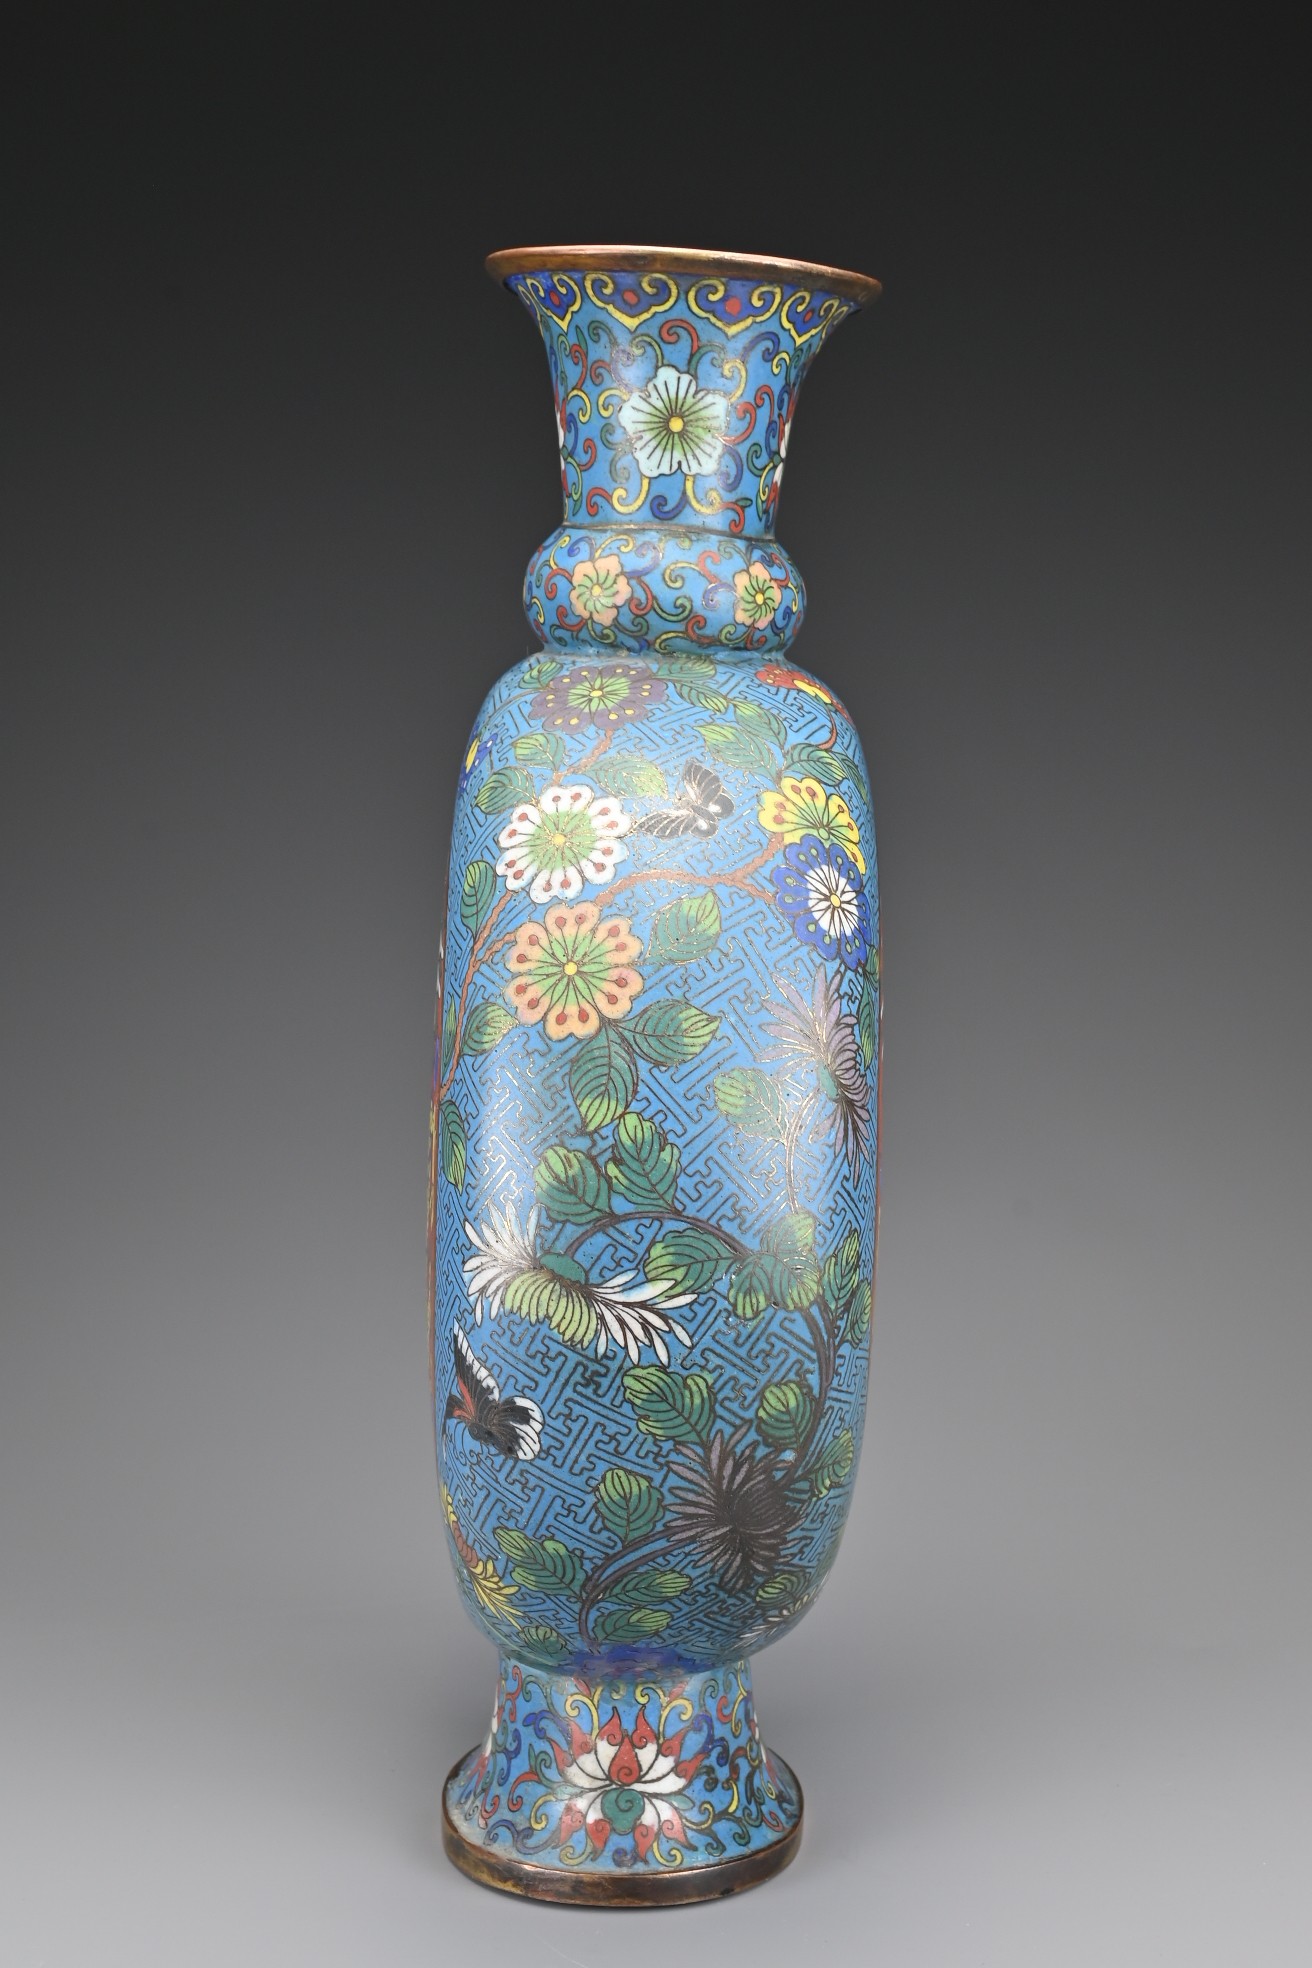 A LARGE CHINESE 19TH CENTURY CLOISONNÉ ENAMEL MOONFLASK, QING DYNASTY. Each face depicting two - Image 3 of 5